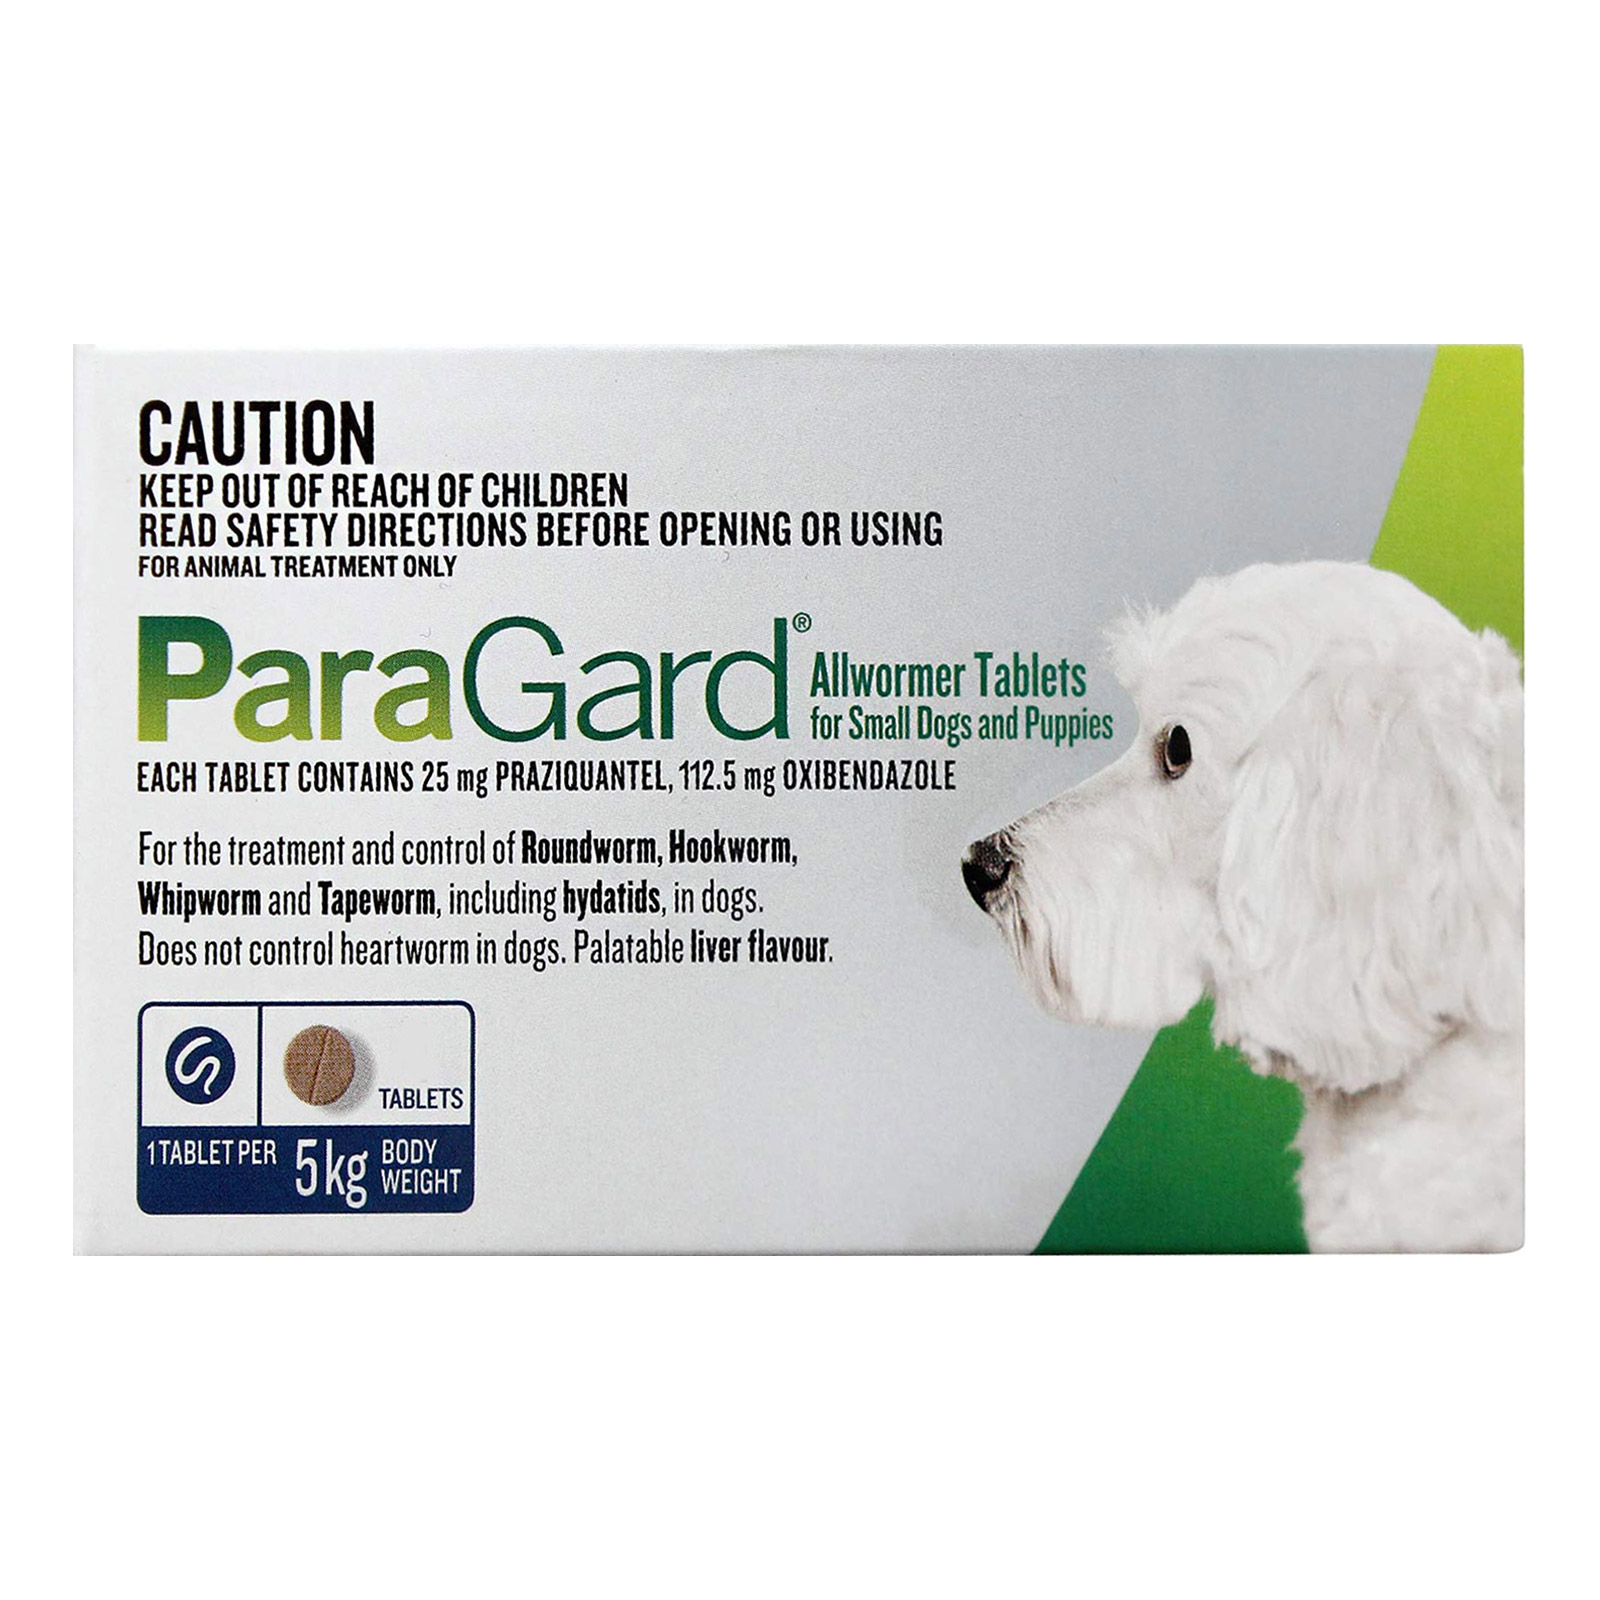 "Paragard Allwormer For Small Dogs 11 Lbs (5 Kg) Blue 4 Tablets"